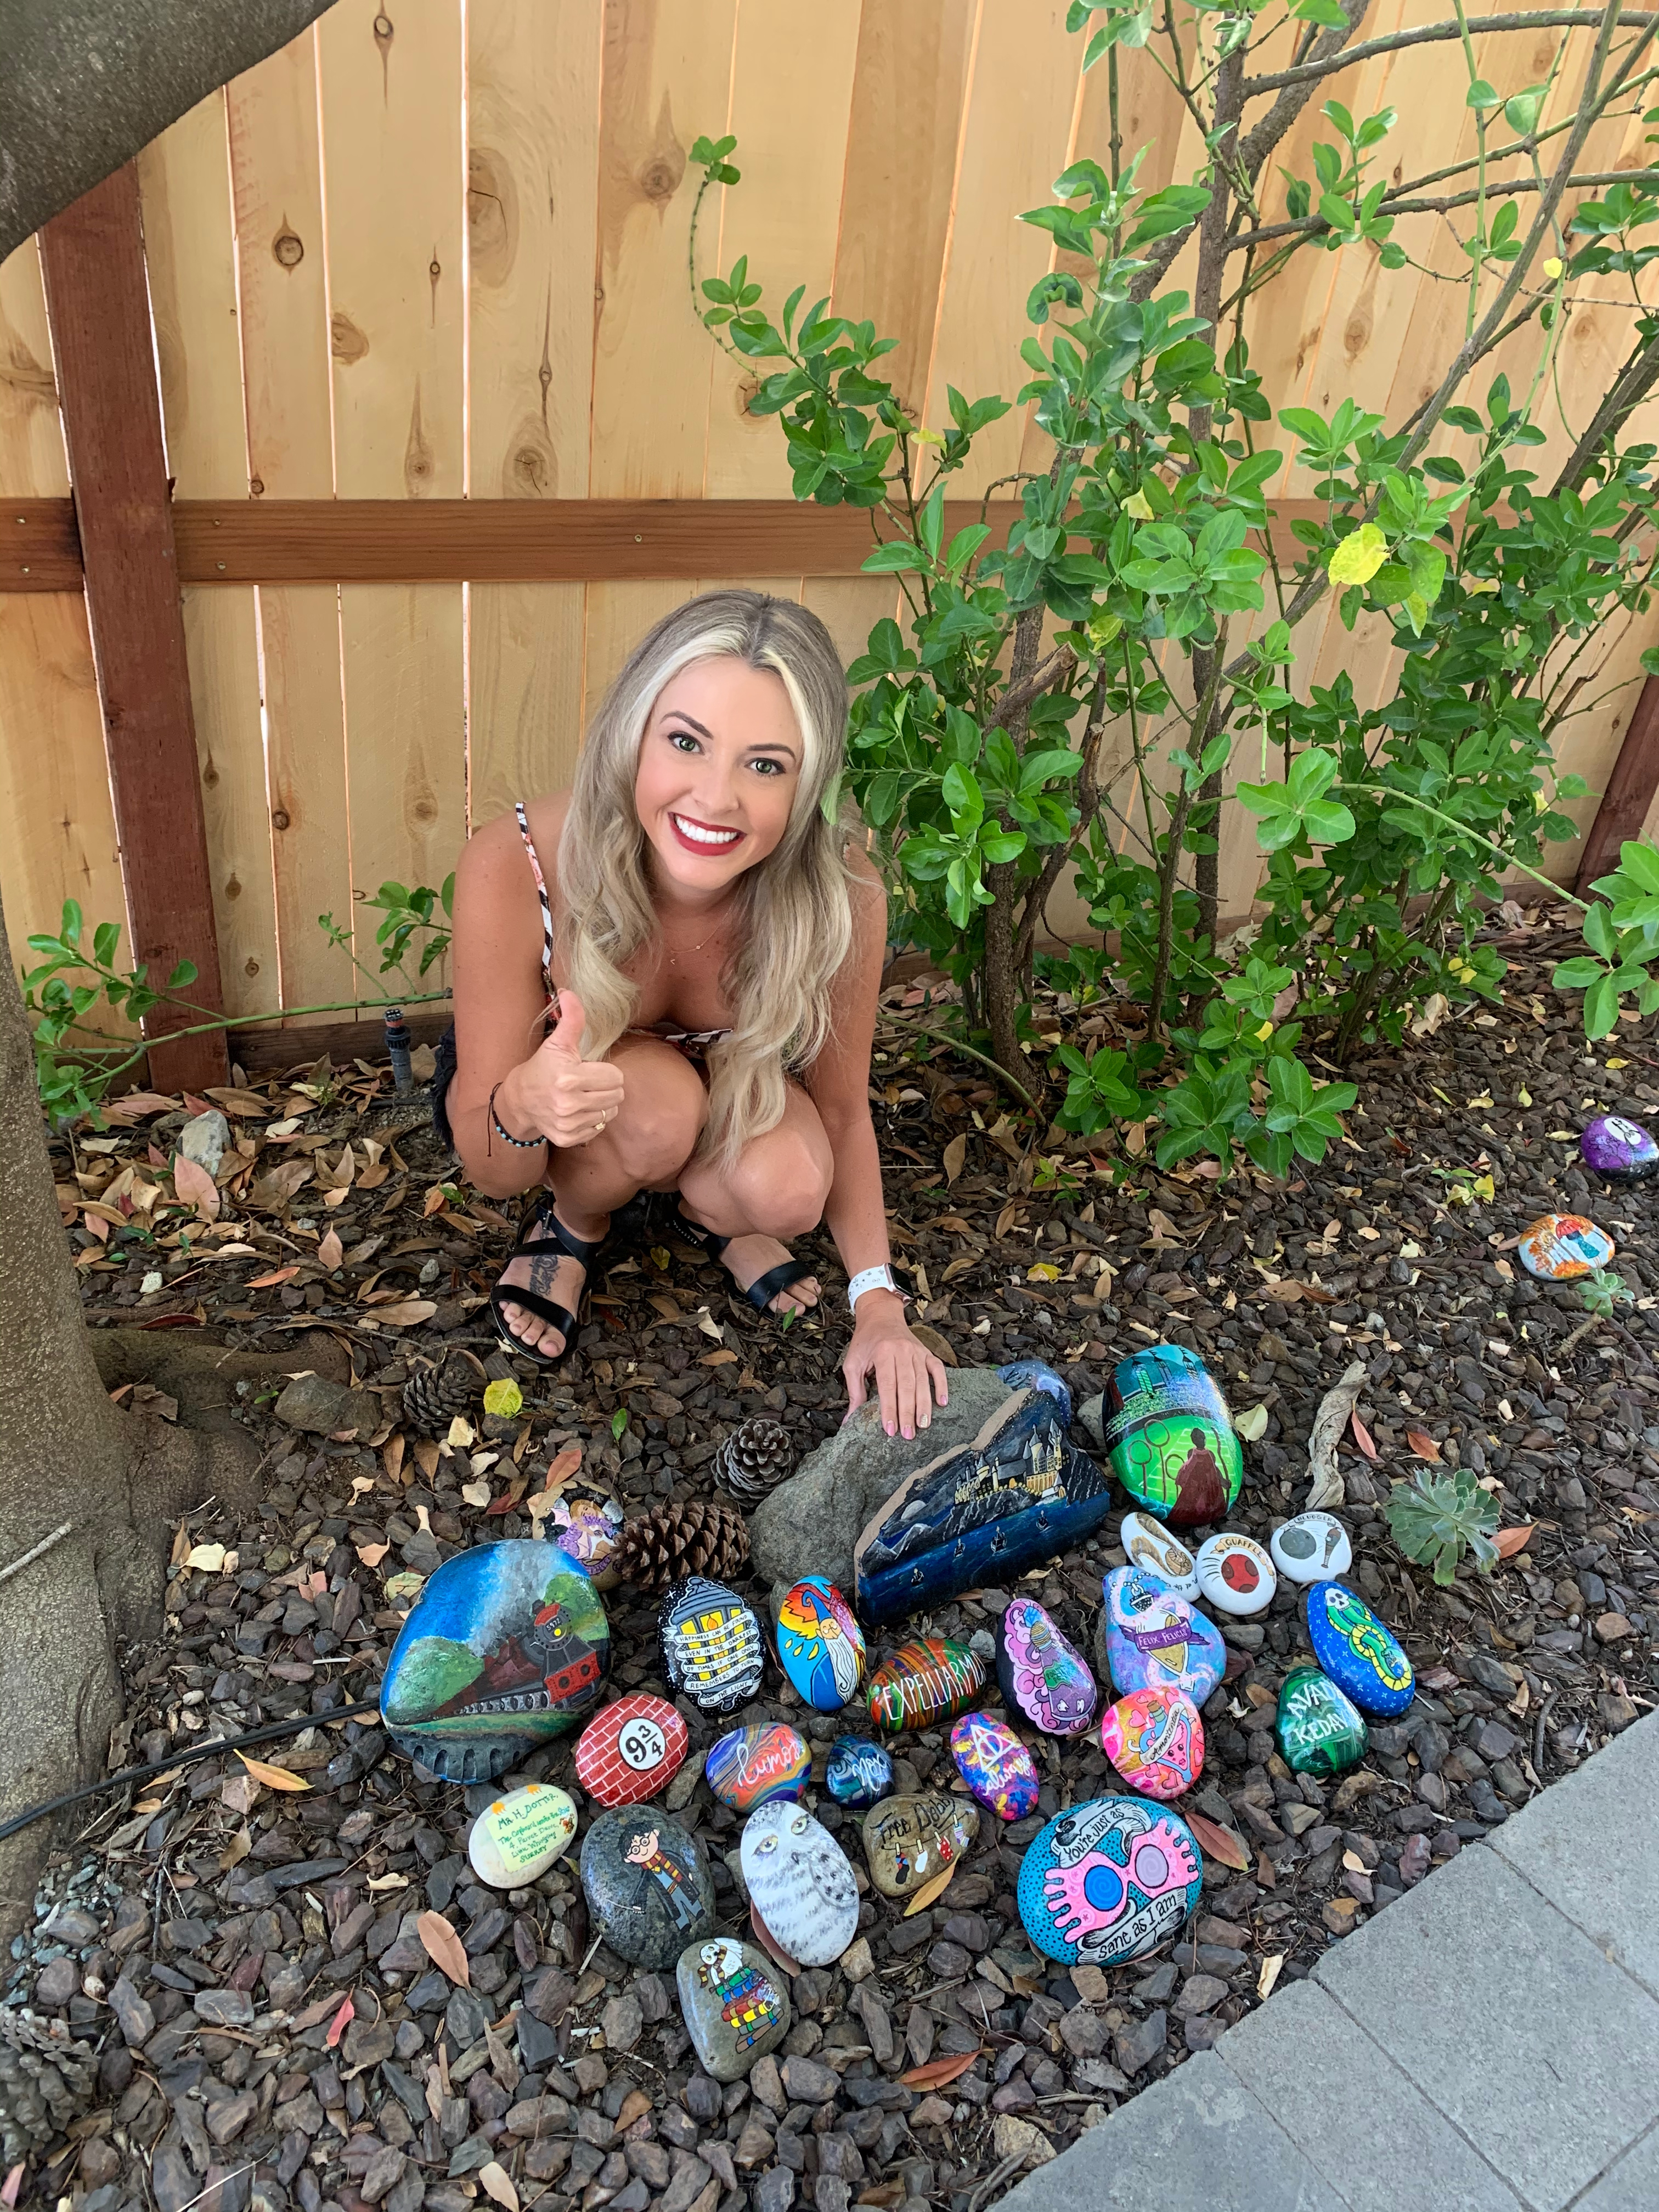 Kristen Newman and her Harry Potter rock garden, with stones painted in a Harry Potter theme